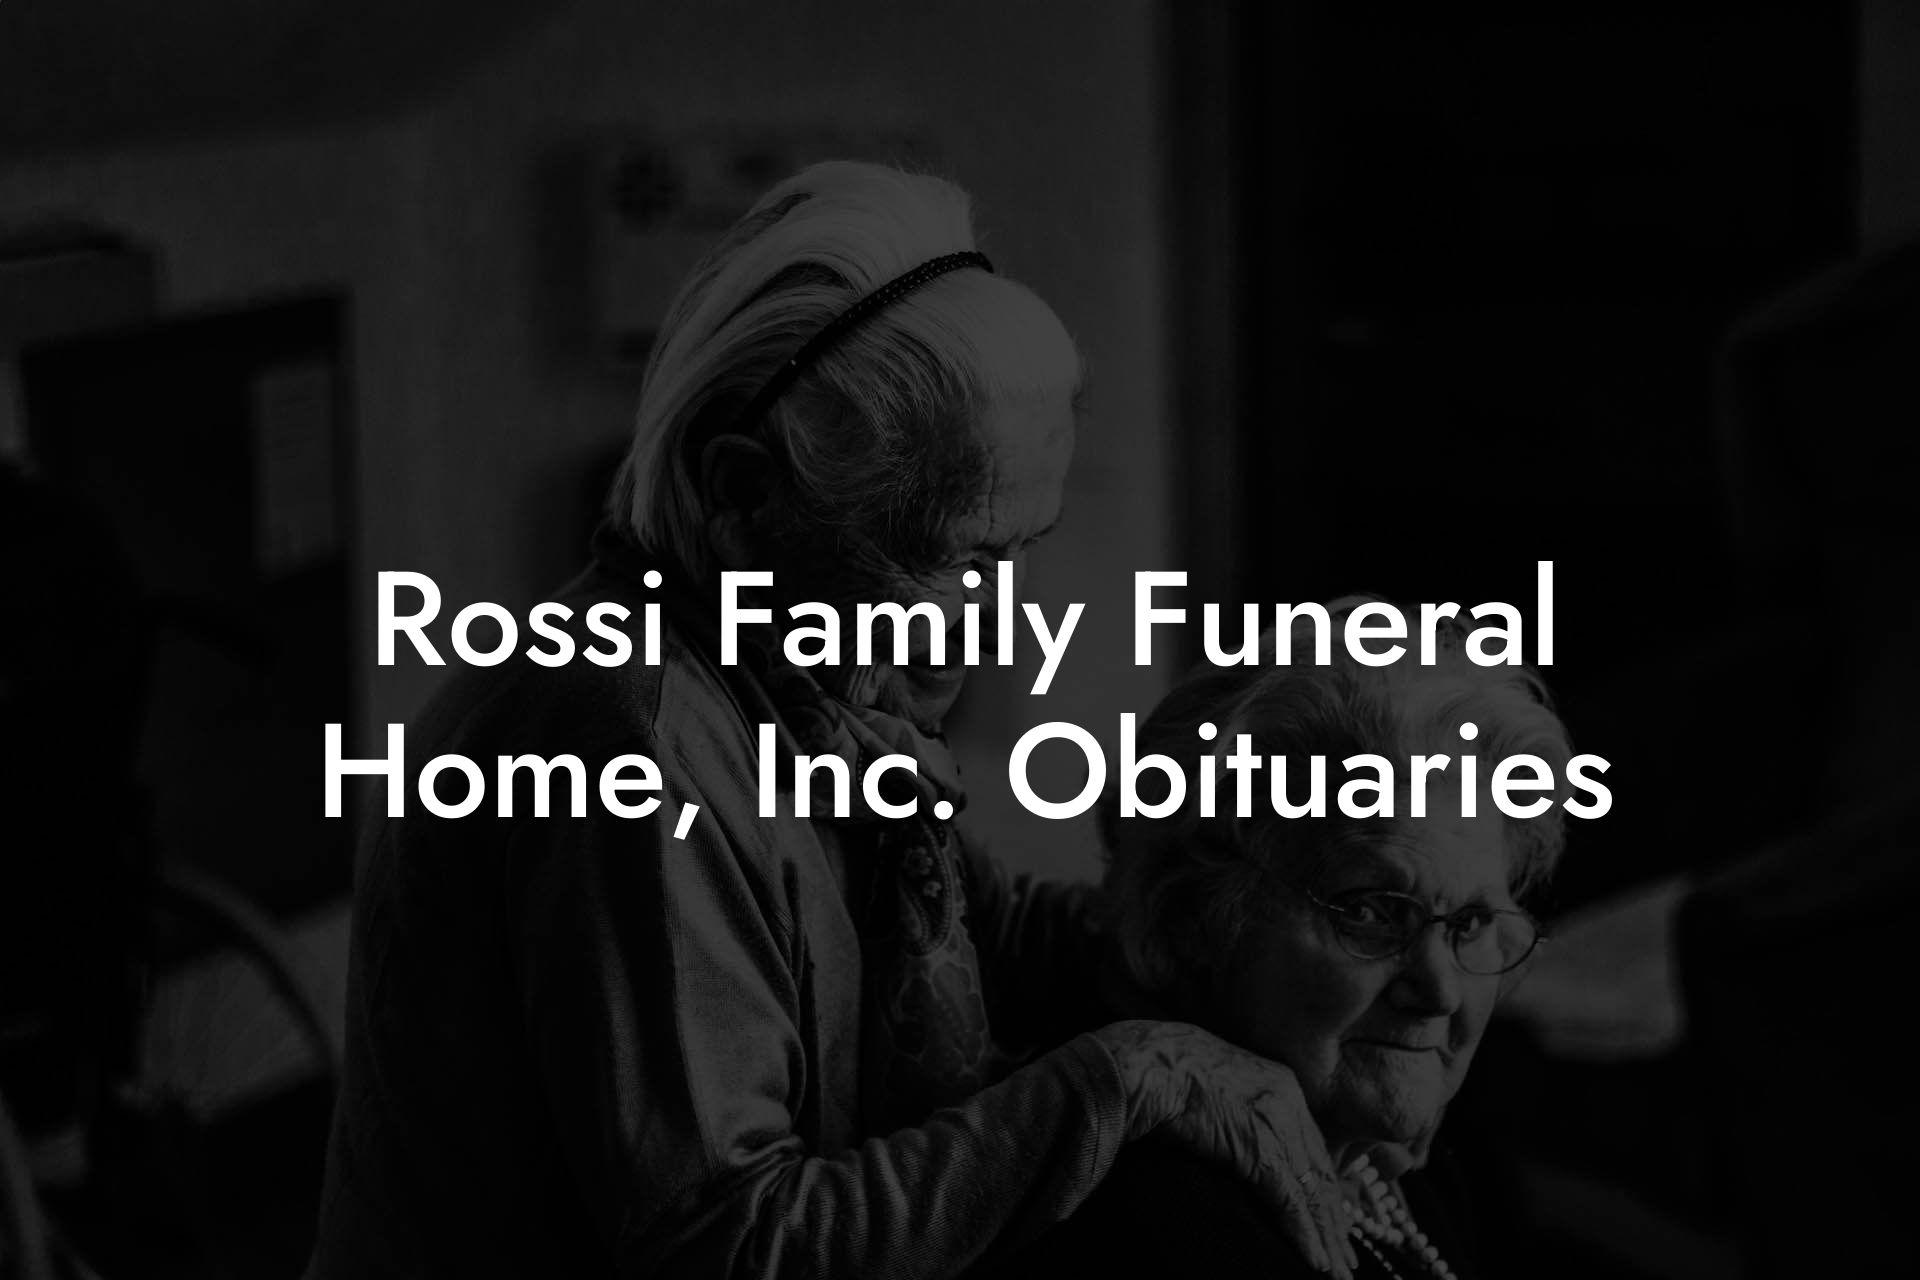 Rossi Family Funeral Home, Inc. Obituaries